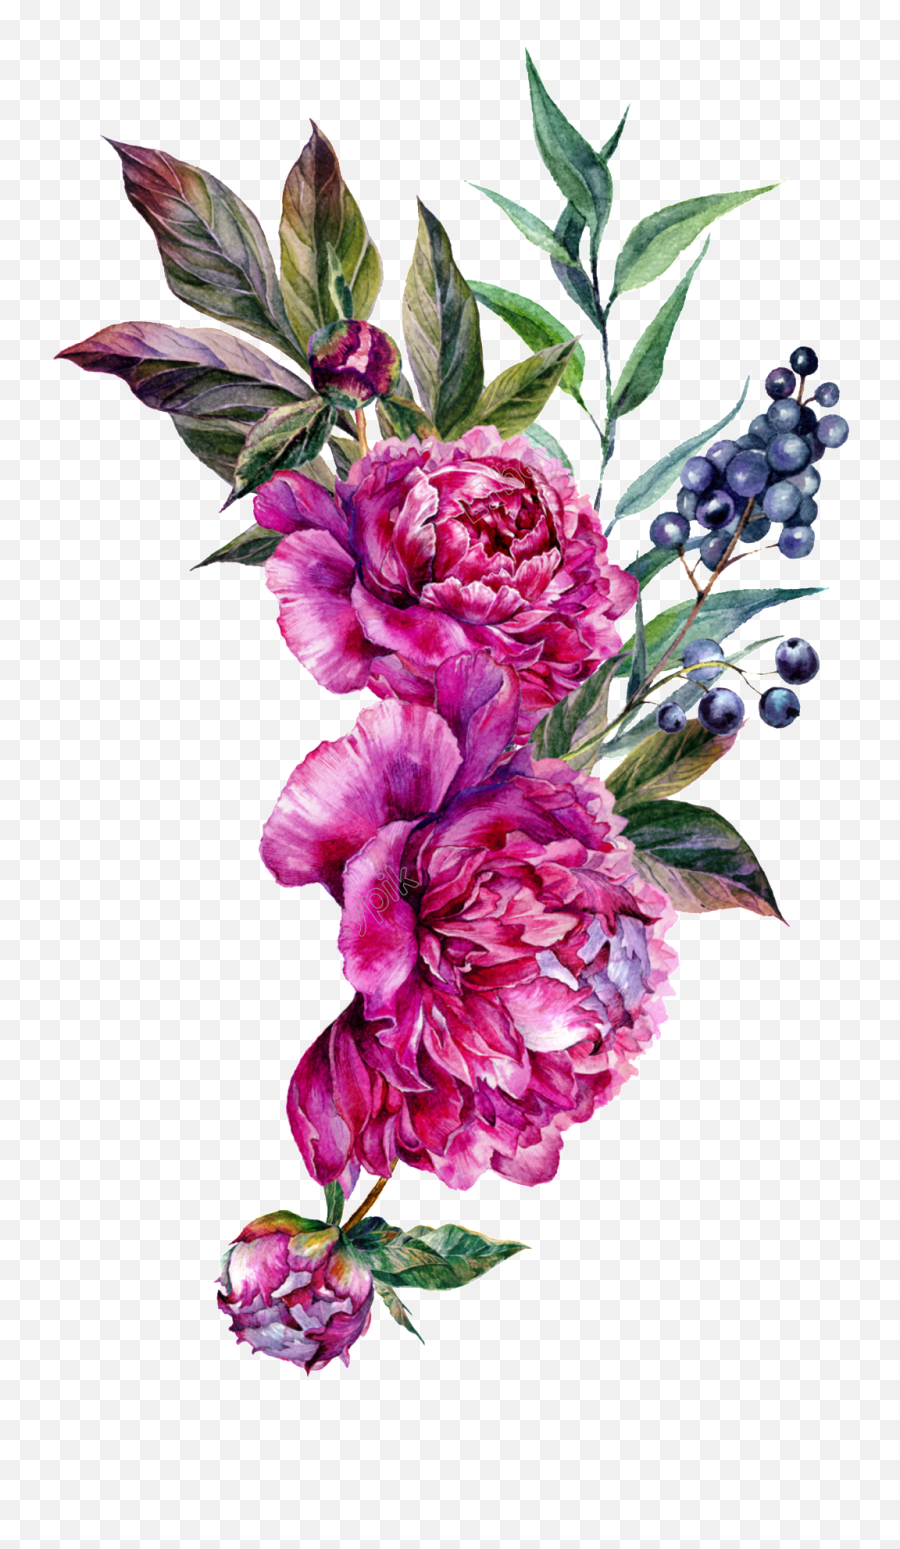 Flower Art - Peony Flower Photos Free Download Png,Flowers Vector Png